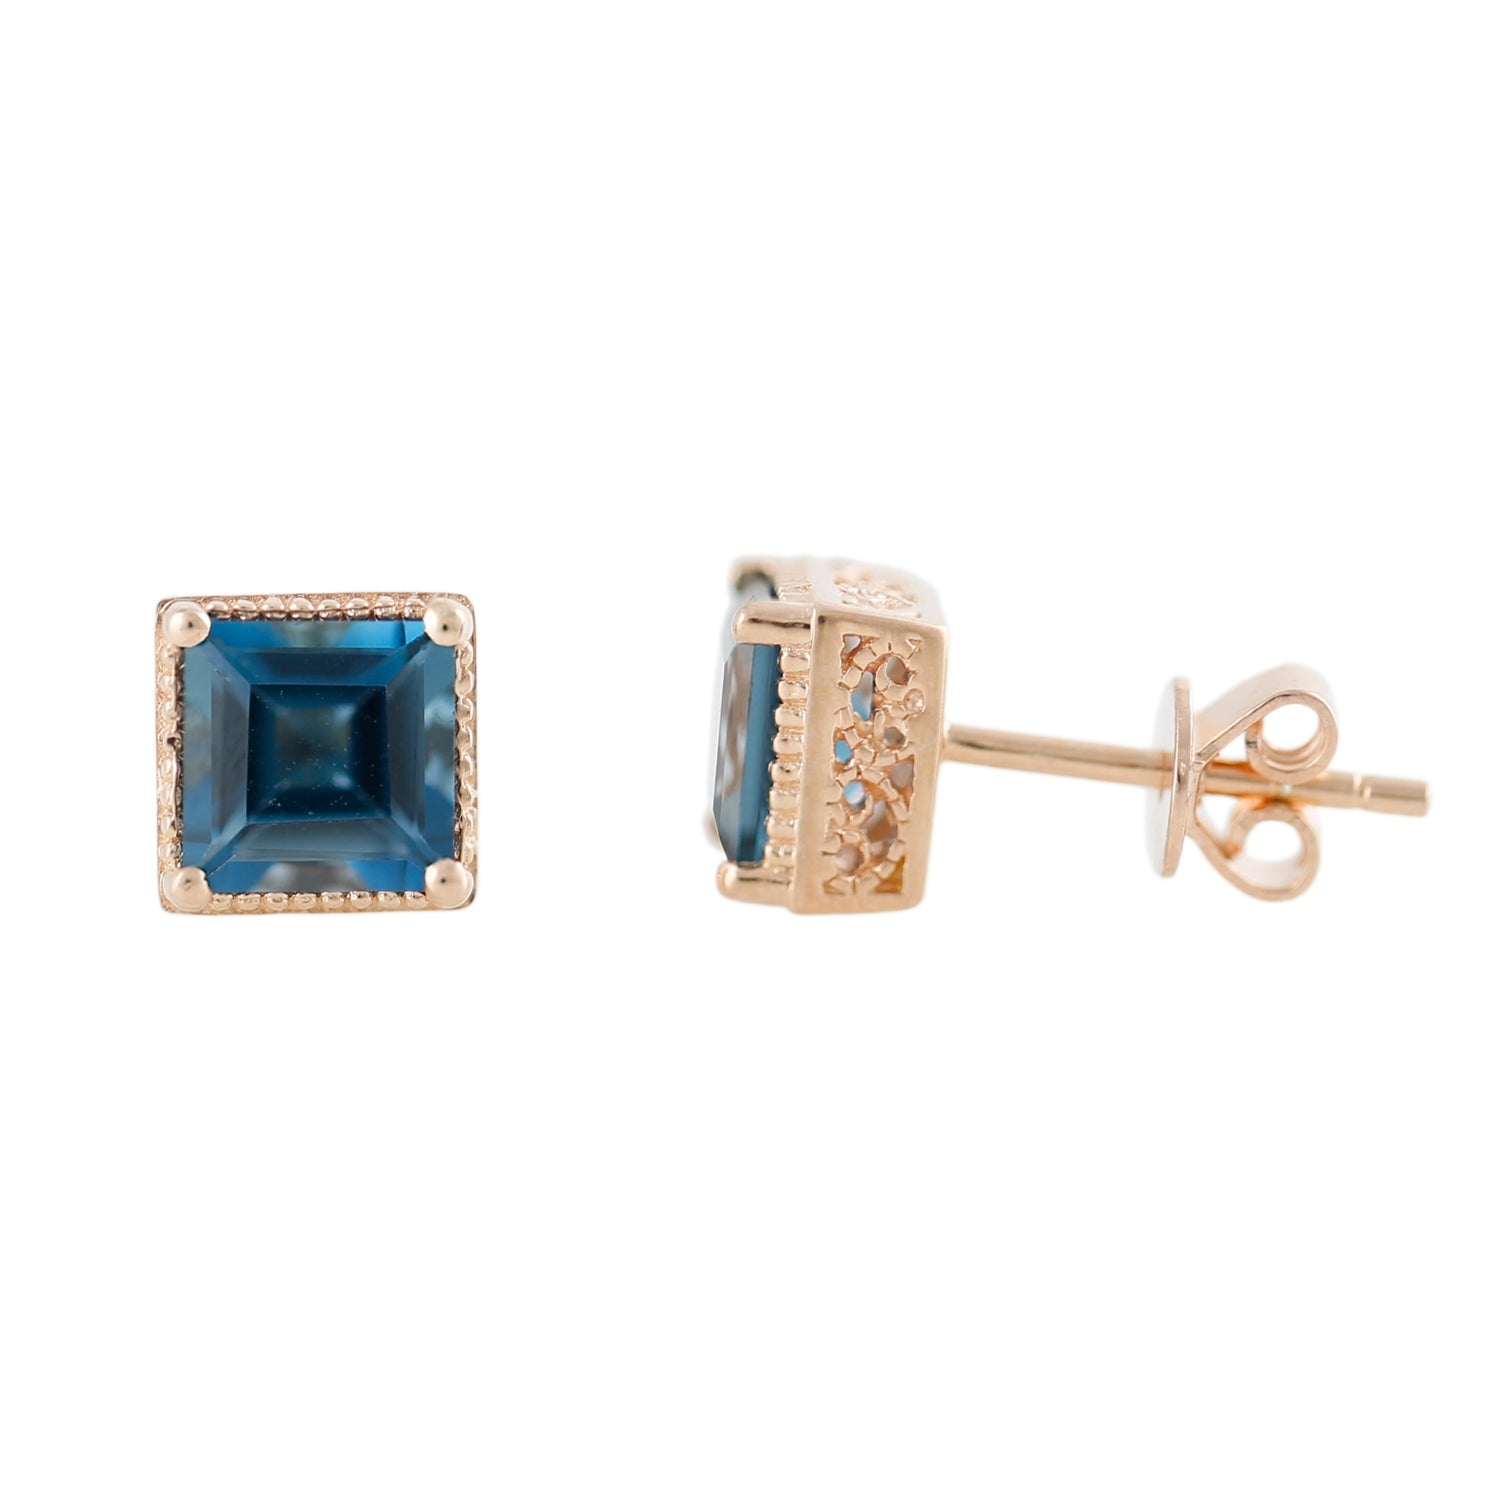 Pinctore 14K Rose Gold Over Ster Silver 2.4ctw London Blue Topaz Square Shaped Earrings - pinctore